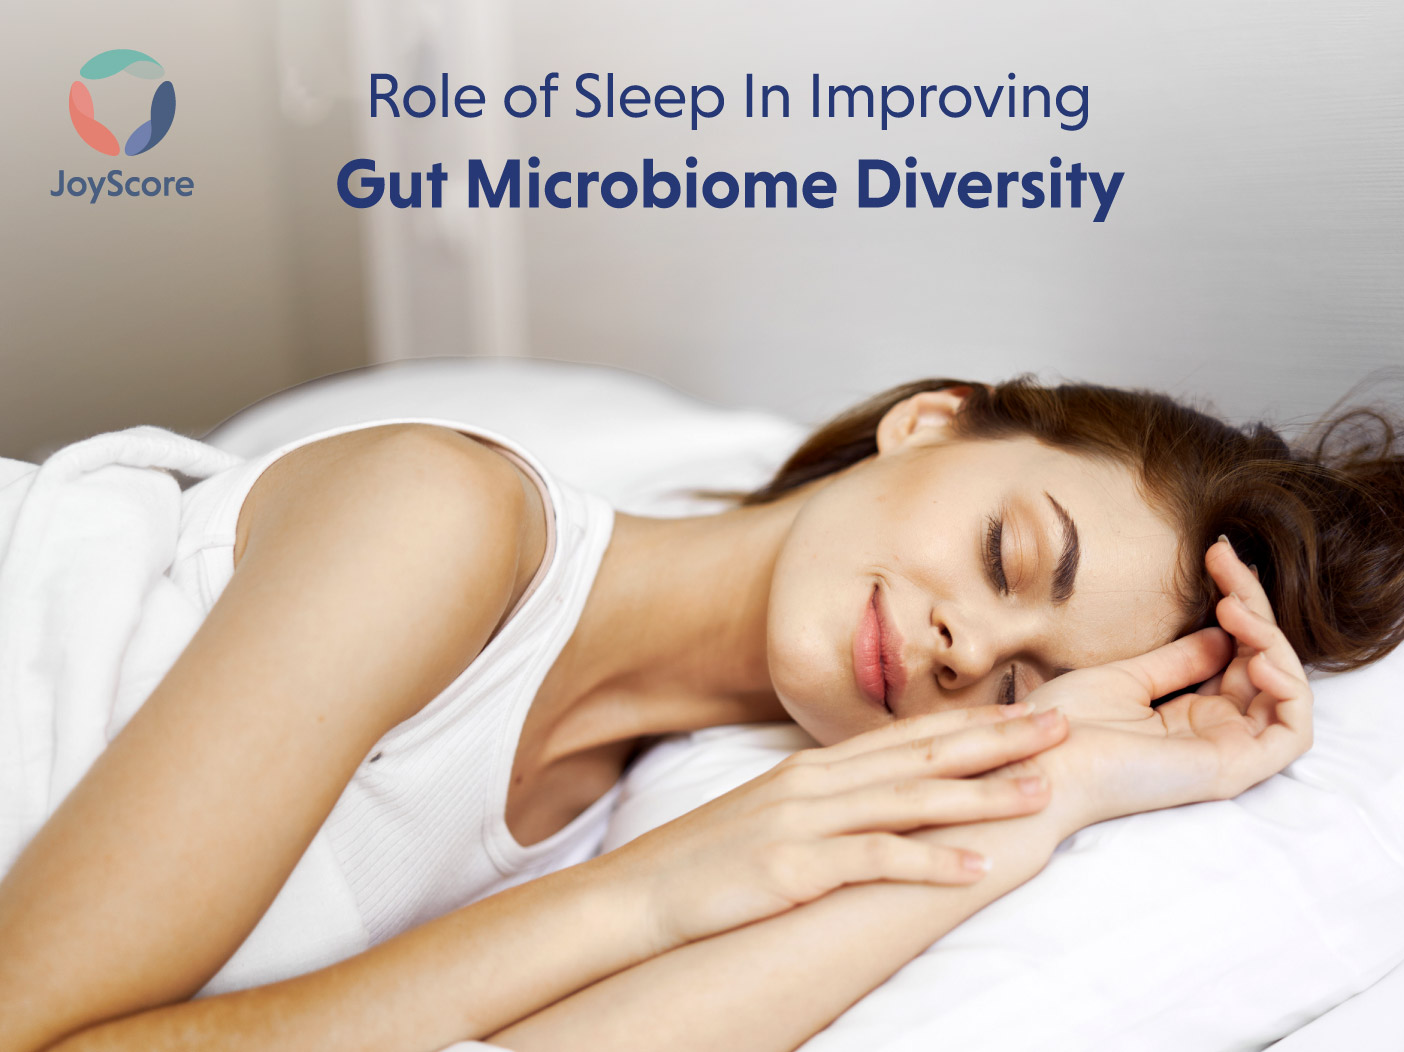 ROLE OF SLEEP IN IMPROVING GUT MICROBIOME DIVERSITY